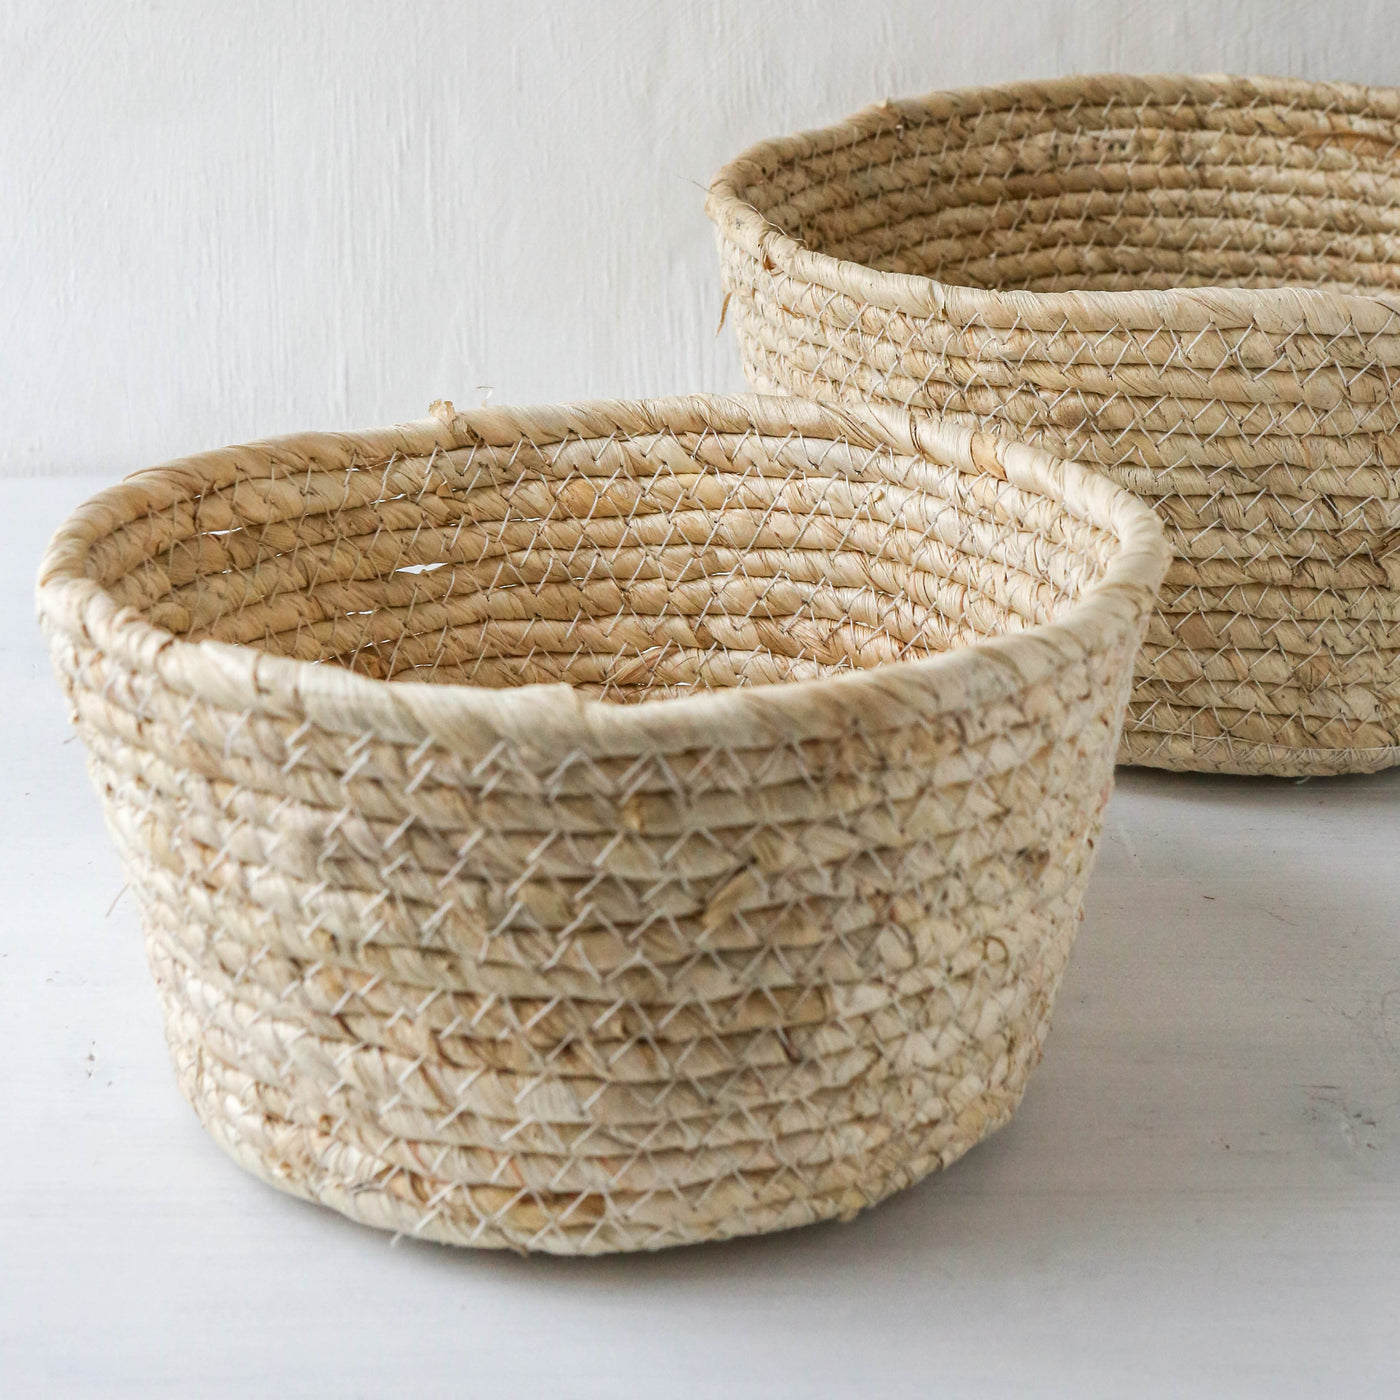 Set of Two Round Woven Baskets